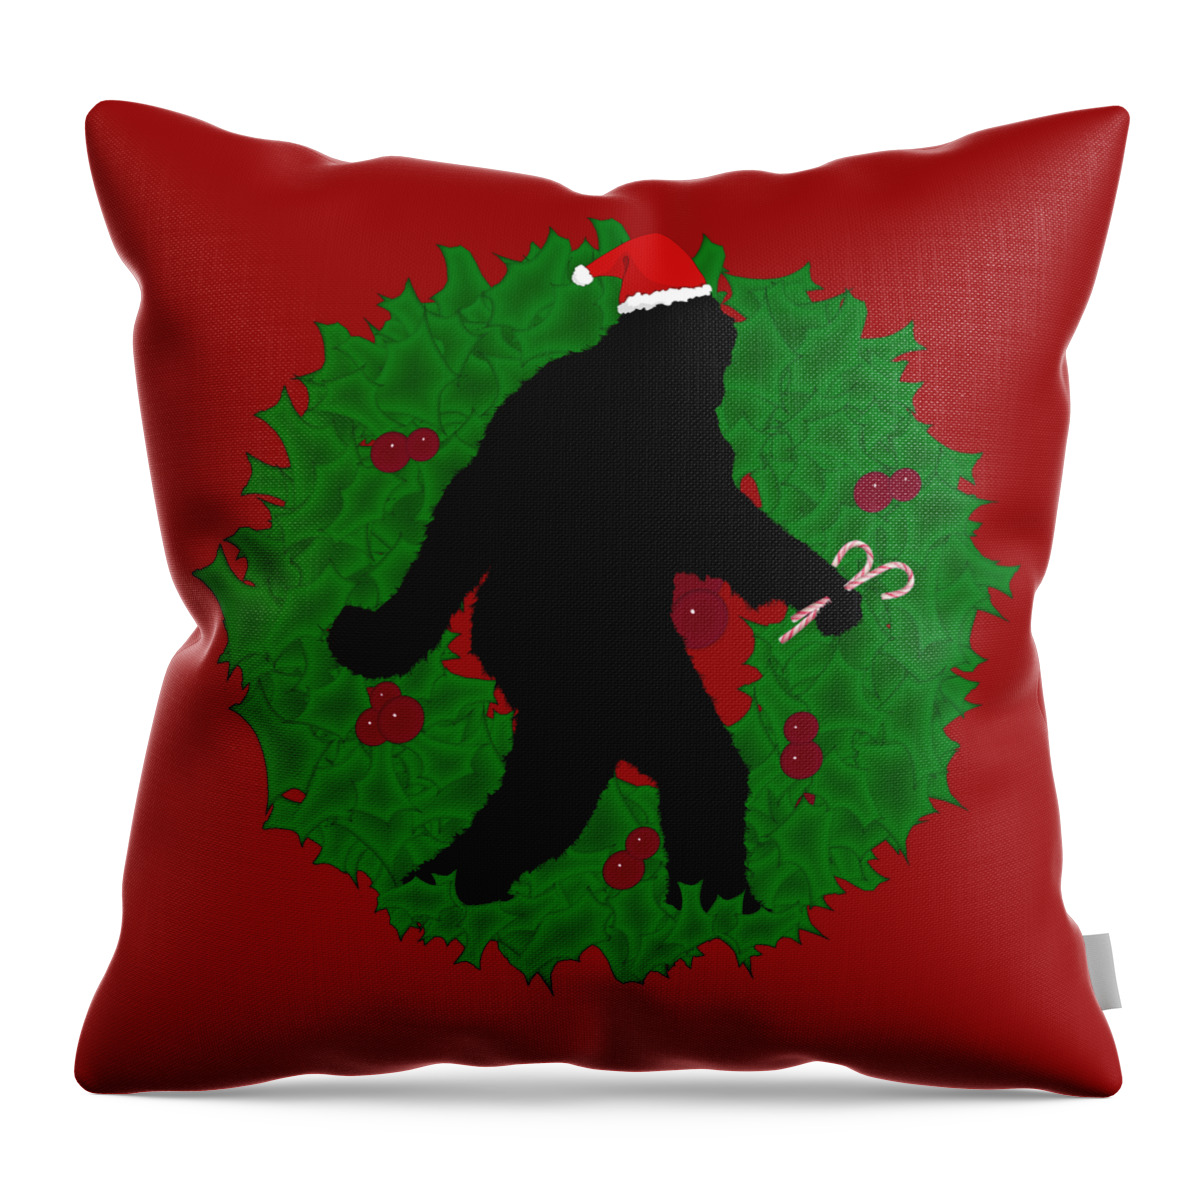 Merry Christmas Throw Pillow featuring the digital art Christmas Sasquatch with Wreath by Gravityx9 Designs